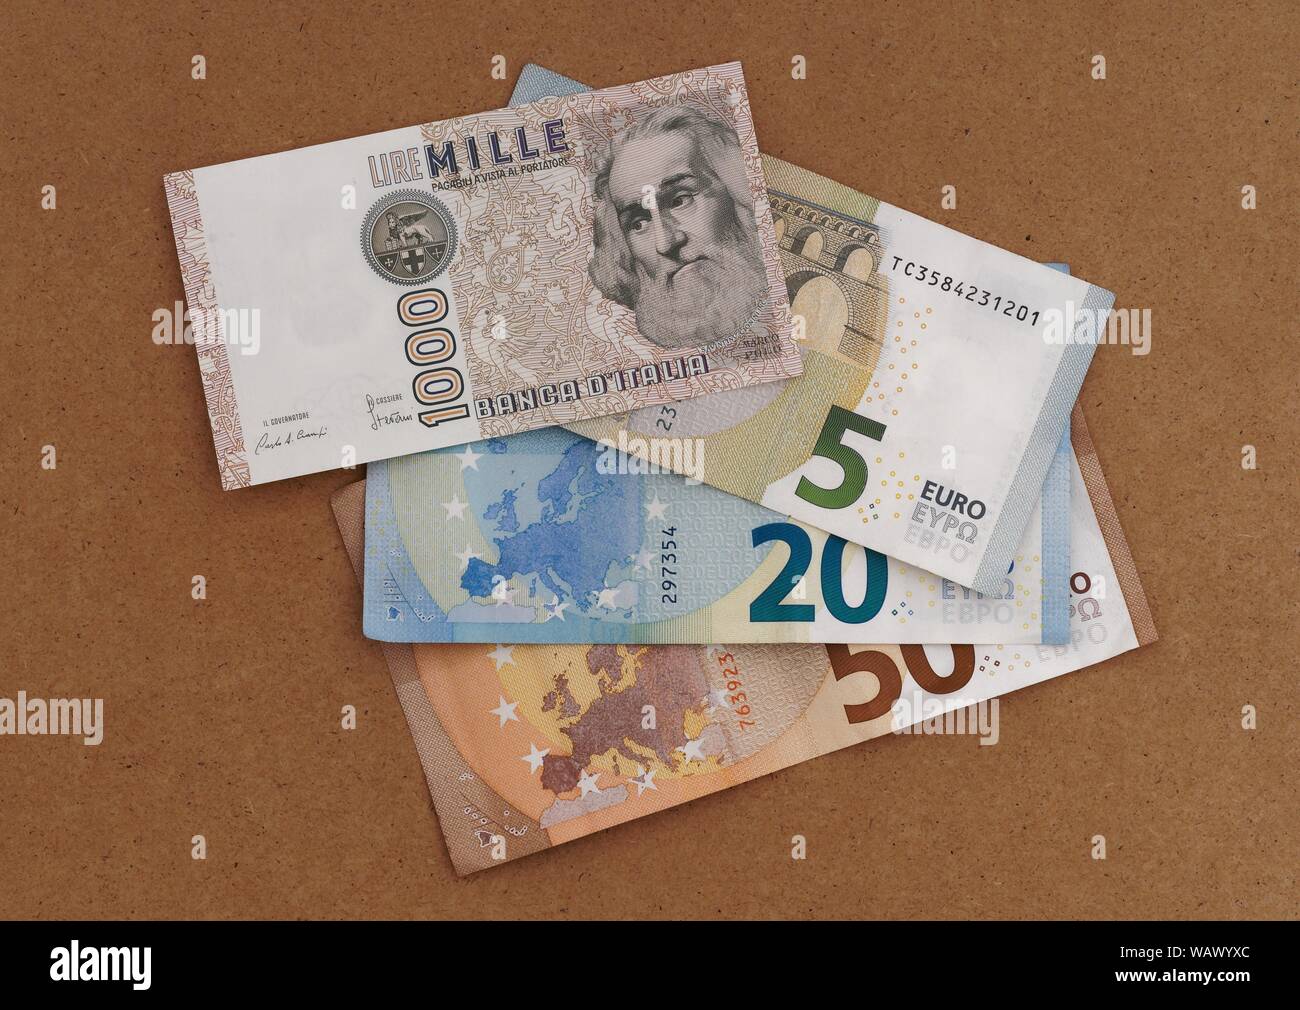 MASSA CARRARA, ITALY - AUGUST 14, 2019: Italian vintage and obsolete Lire note overlays and part obscures new Euro currency. Stock Photo